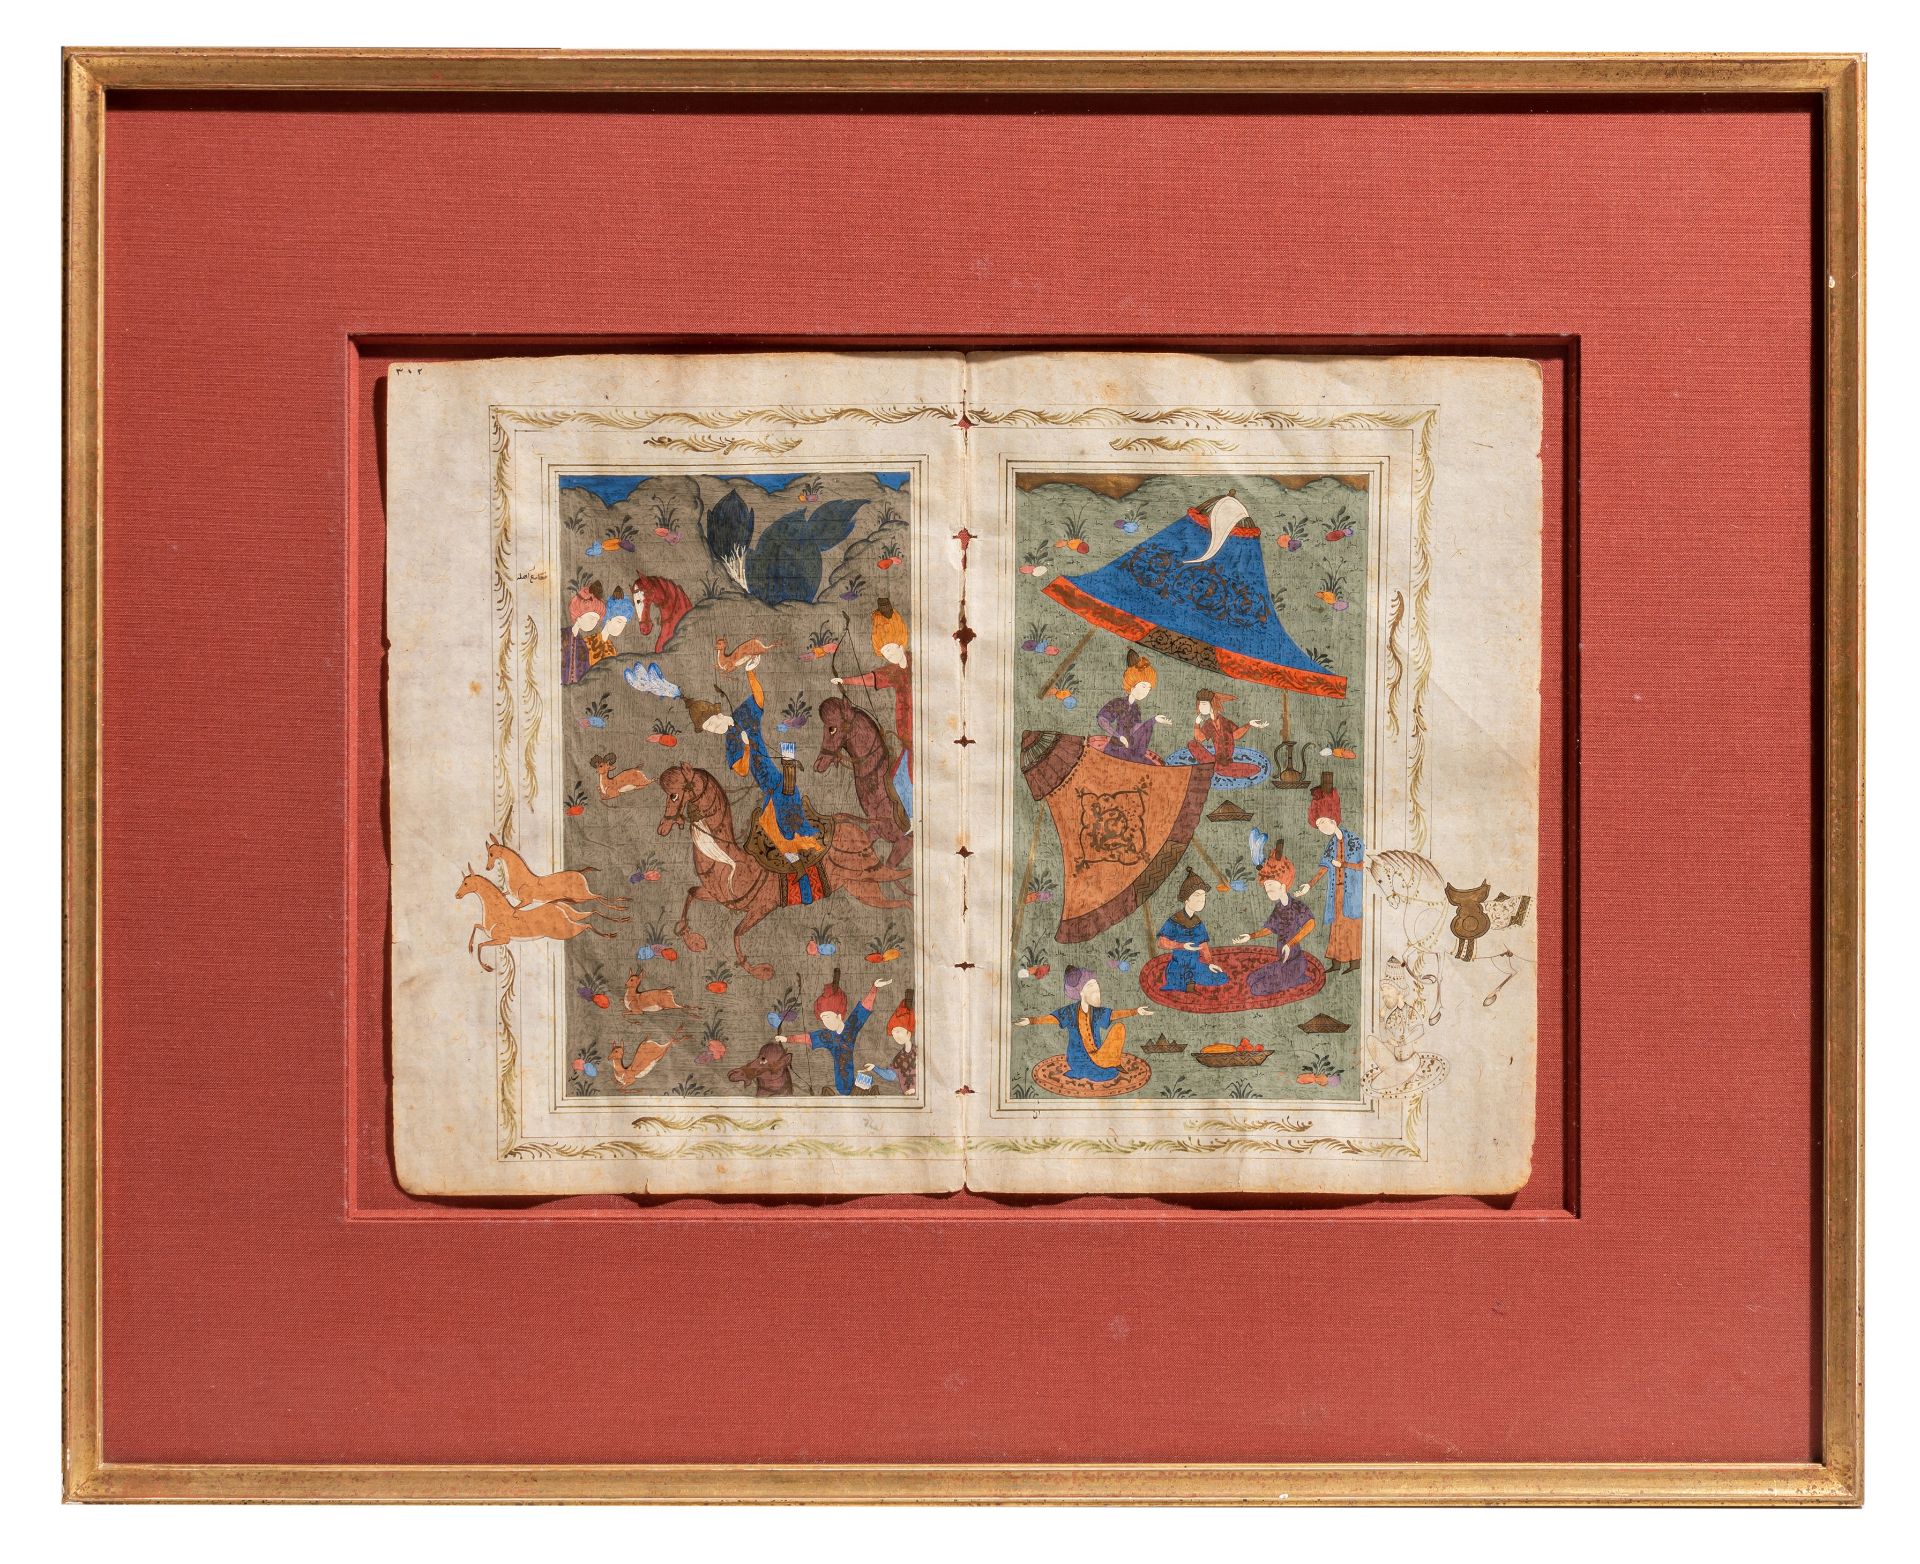 Two fine Persian gouache drawings depicting battle and hunting scenes, 18th/19thC, 32,5 x 21,5 - 27,